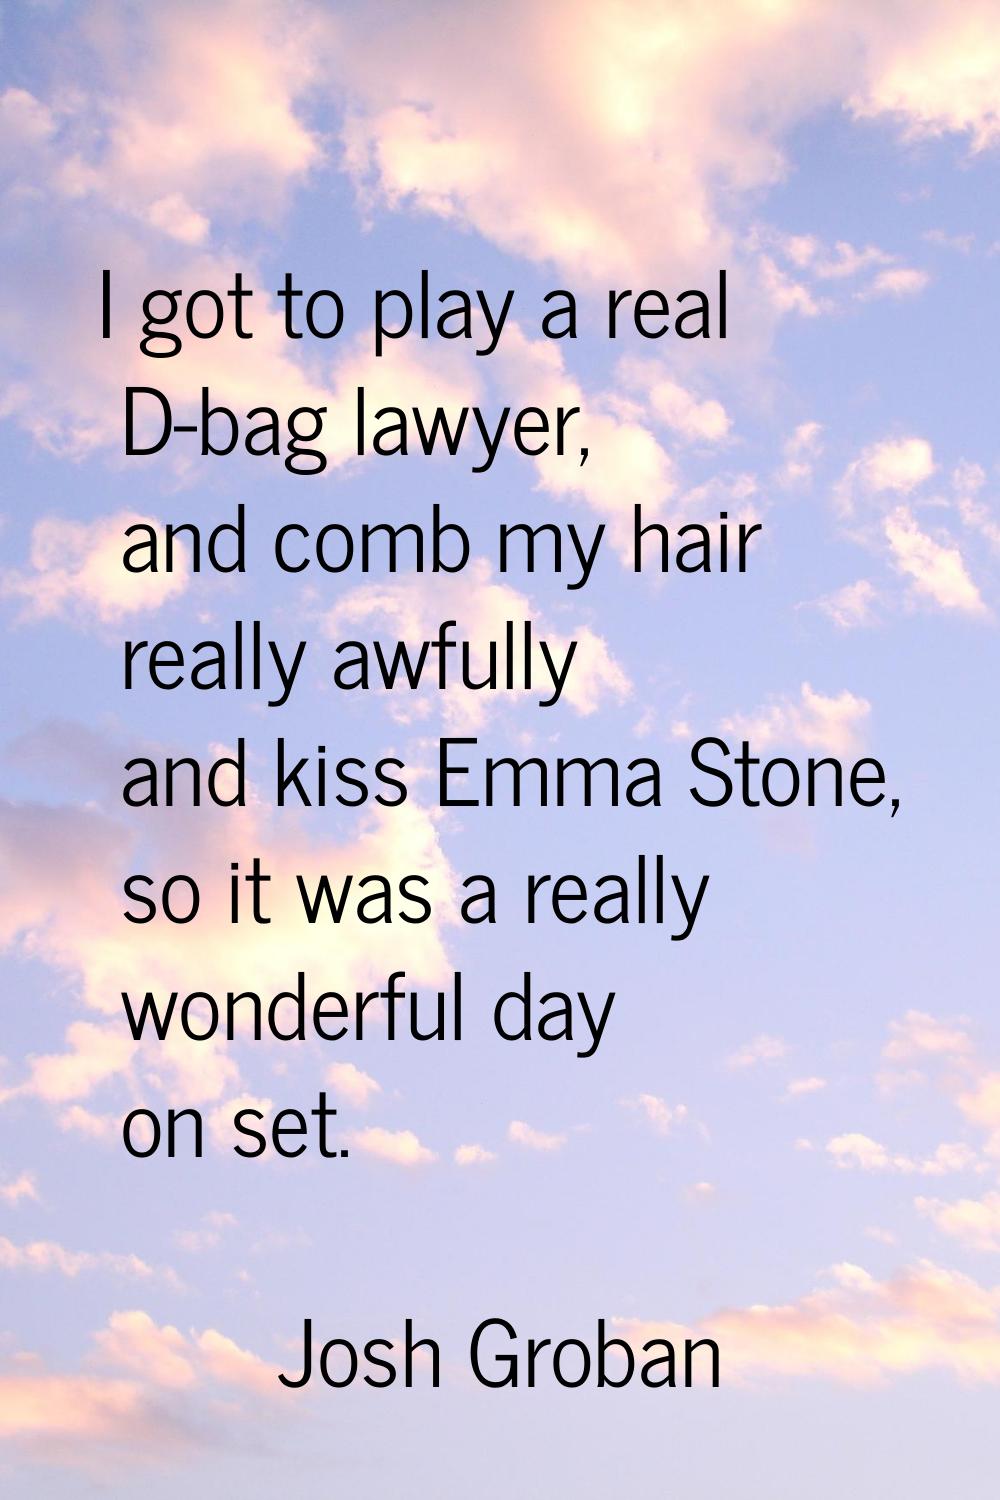 I got to play a real D-bag lawyer, and comb my hair really awfully and kiss Emma Stone, so it was a